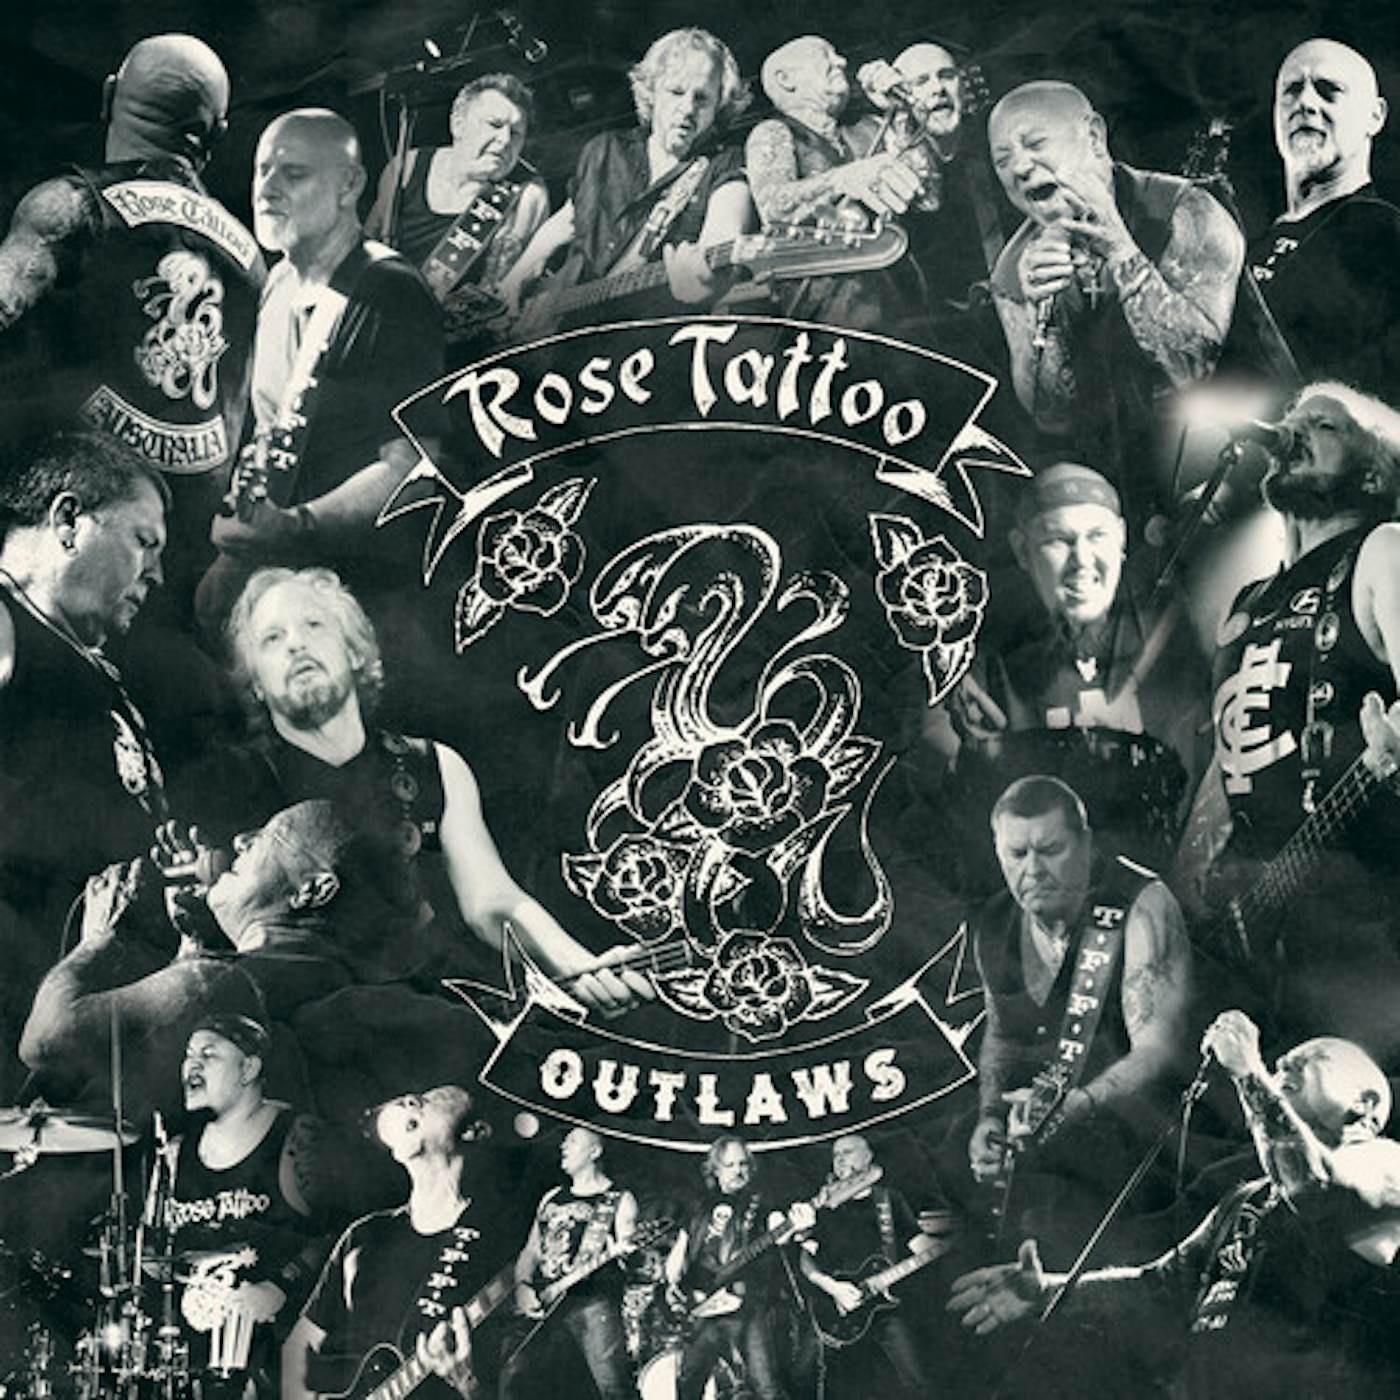 Rose Tattoo Outlaws Vinyl Record